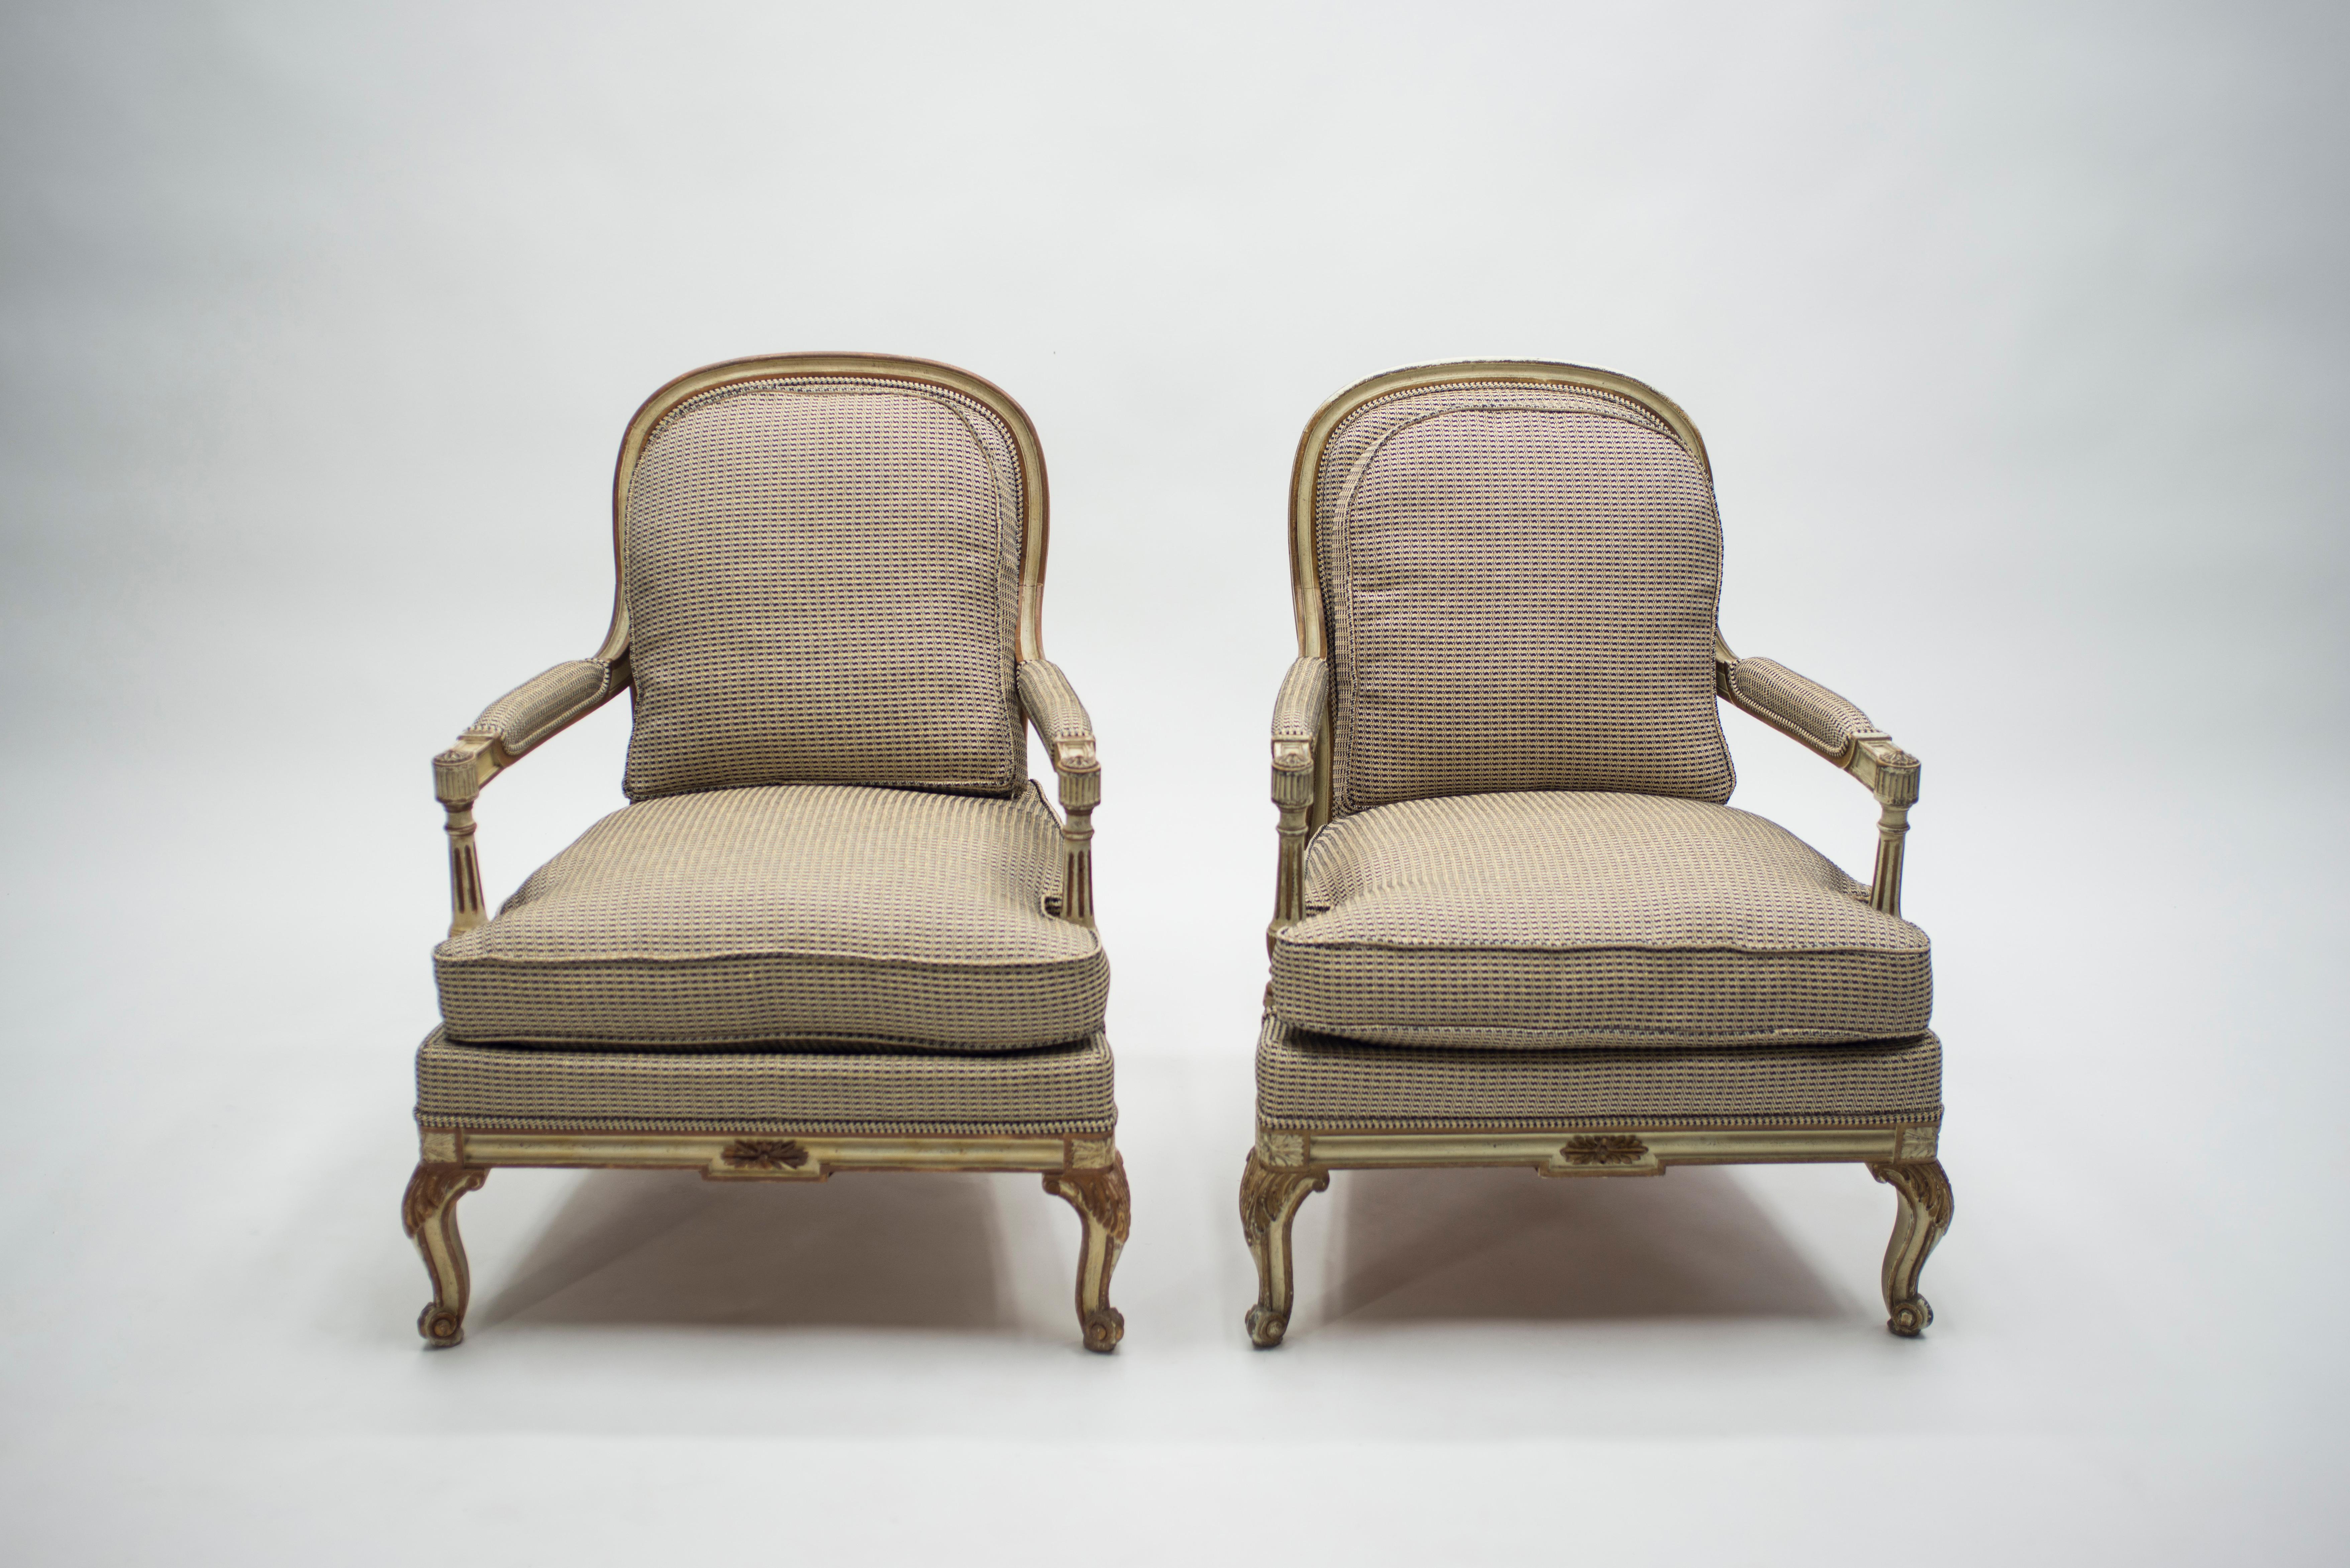 Hand-Painted Rare Neoclassical Set of 4 Armchairs Signed by Maurice Hirsch, 1970s